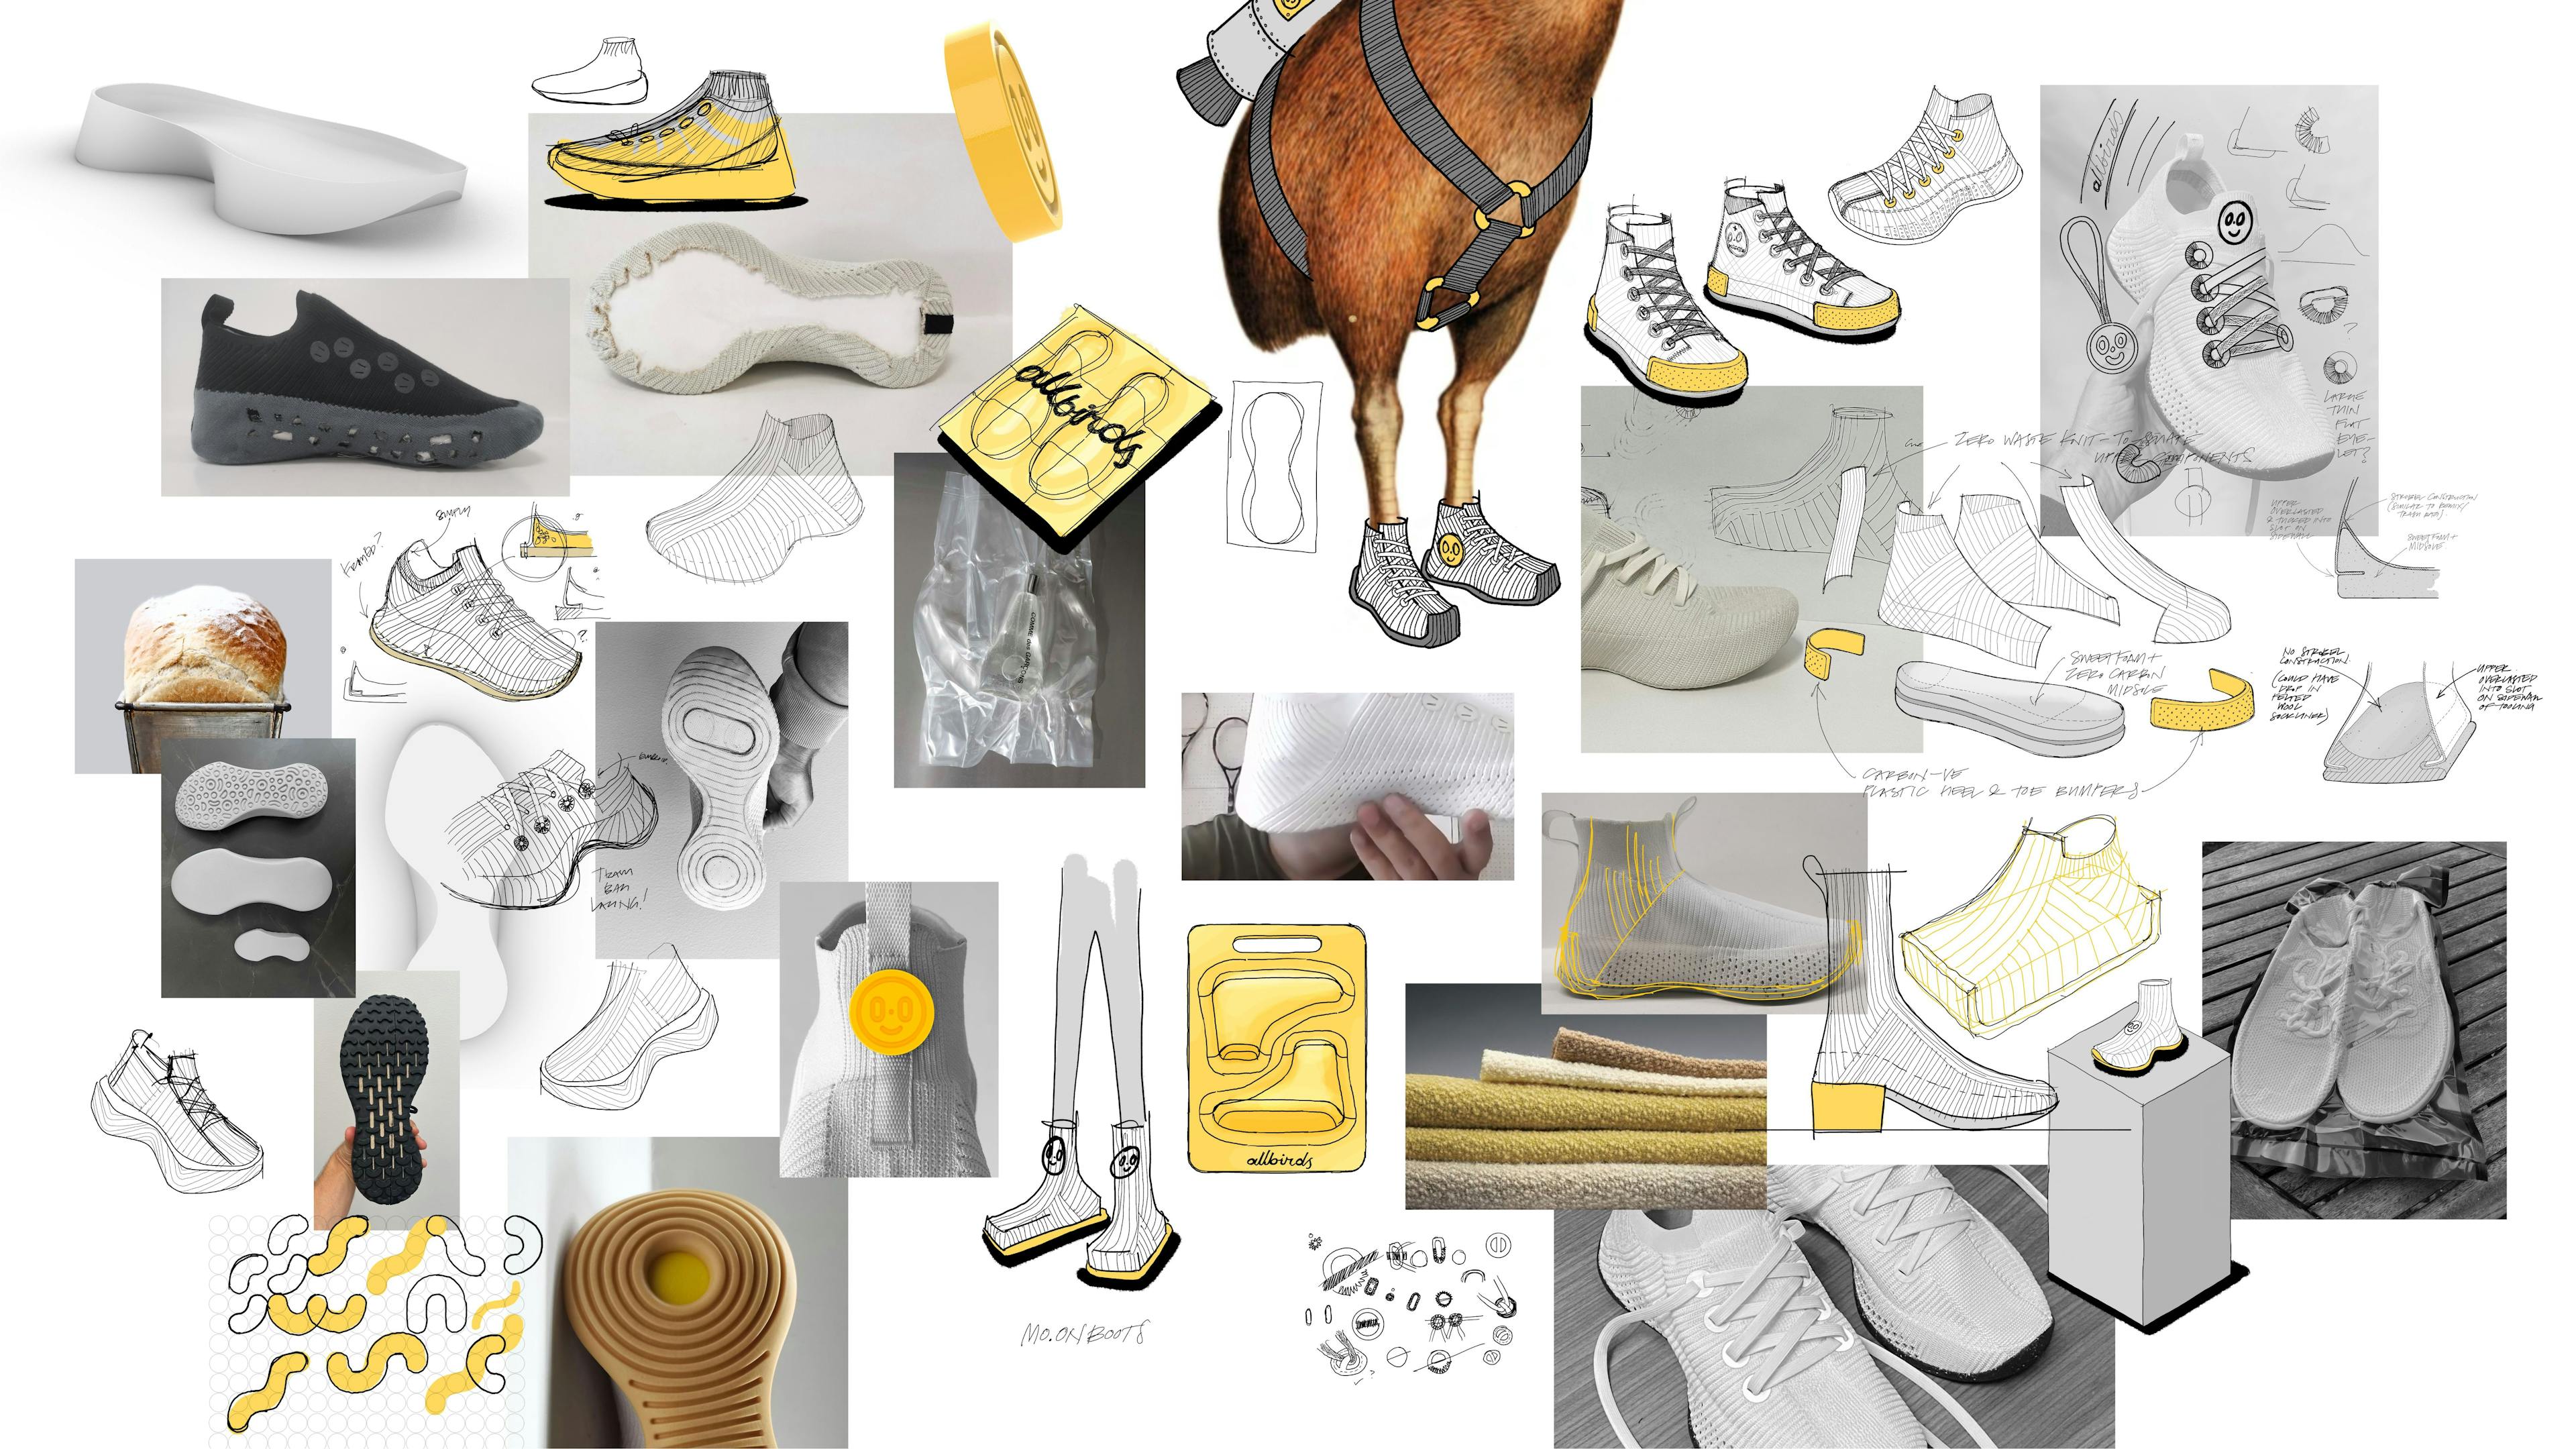 A collage of inspiration and plans for the M0.0NSHOT shoe.